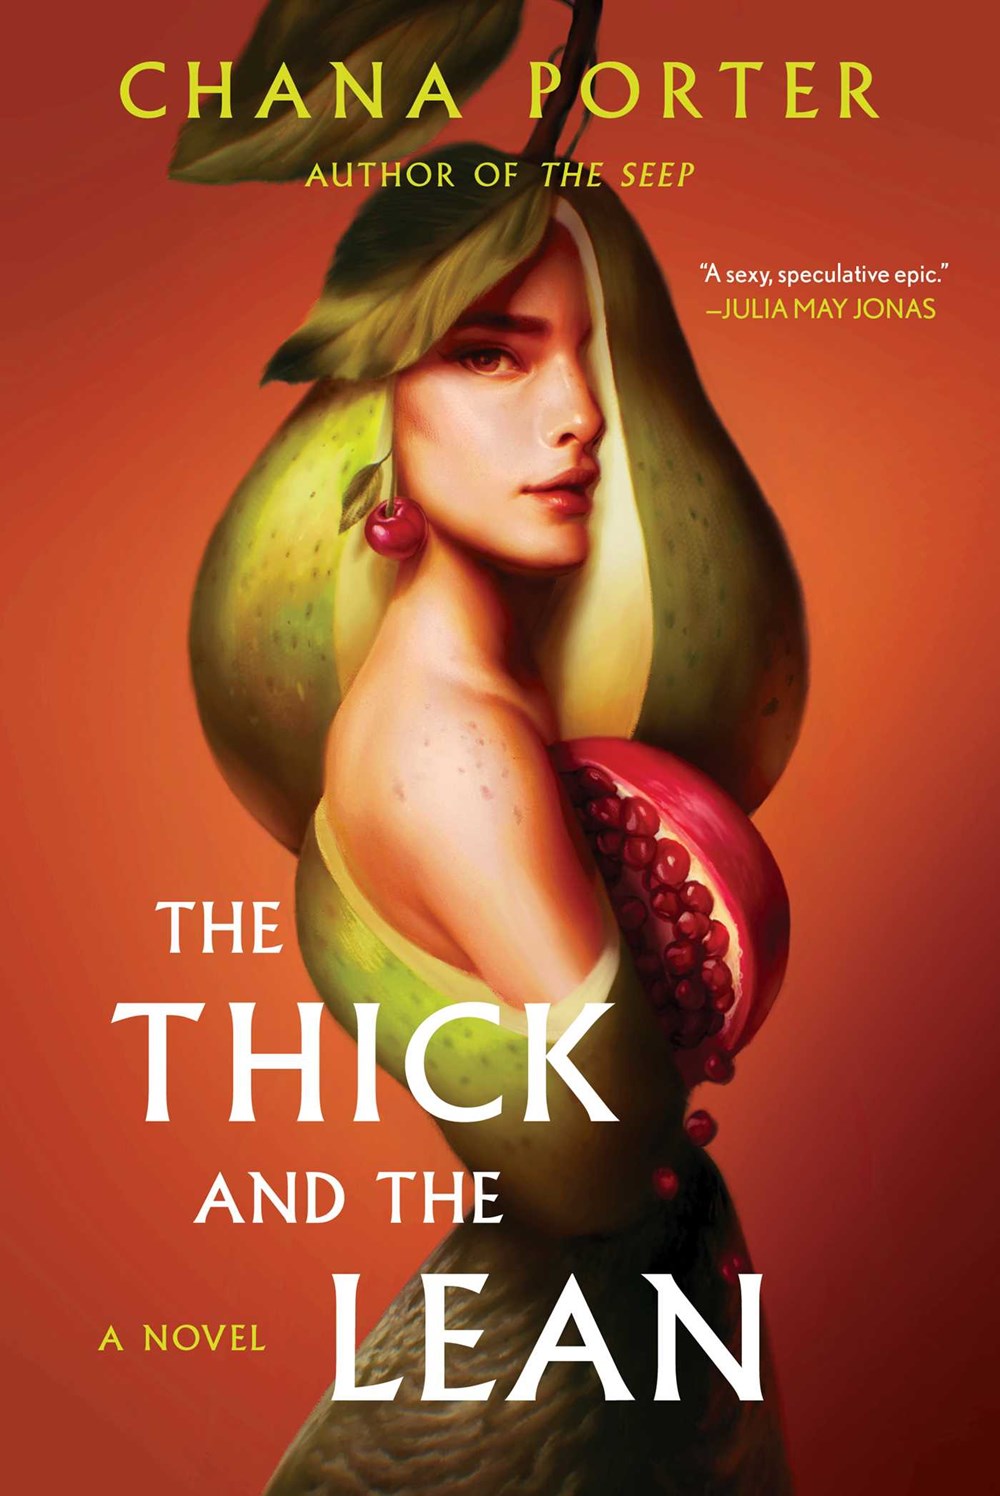 The Thick and the Lean by Chana Porter